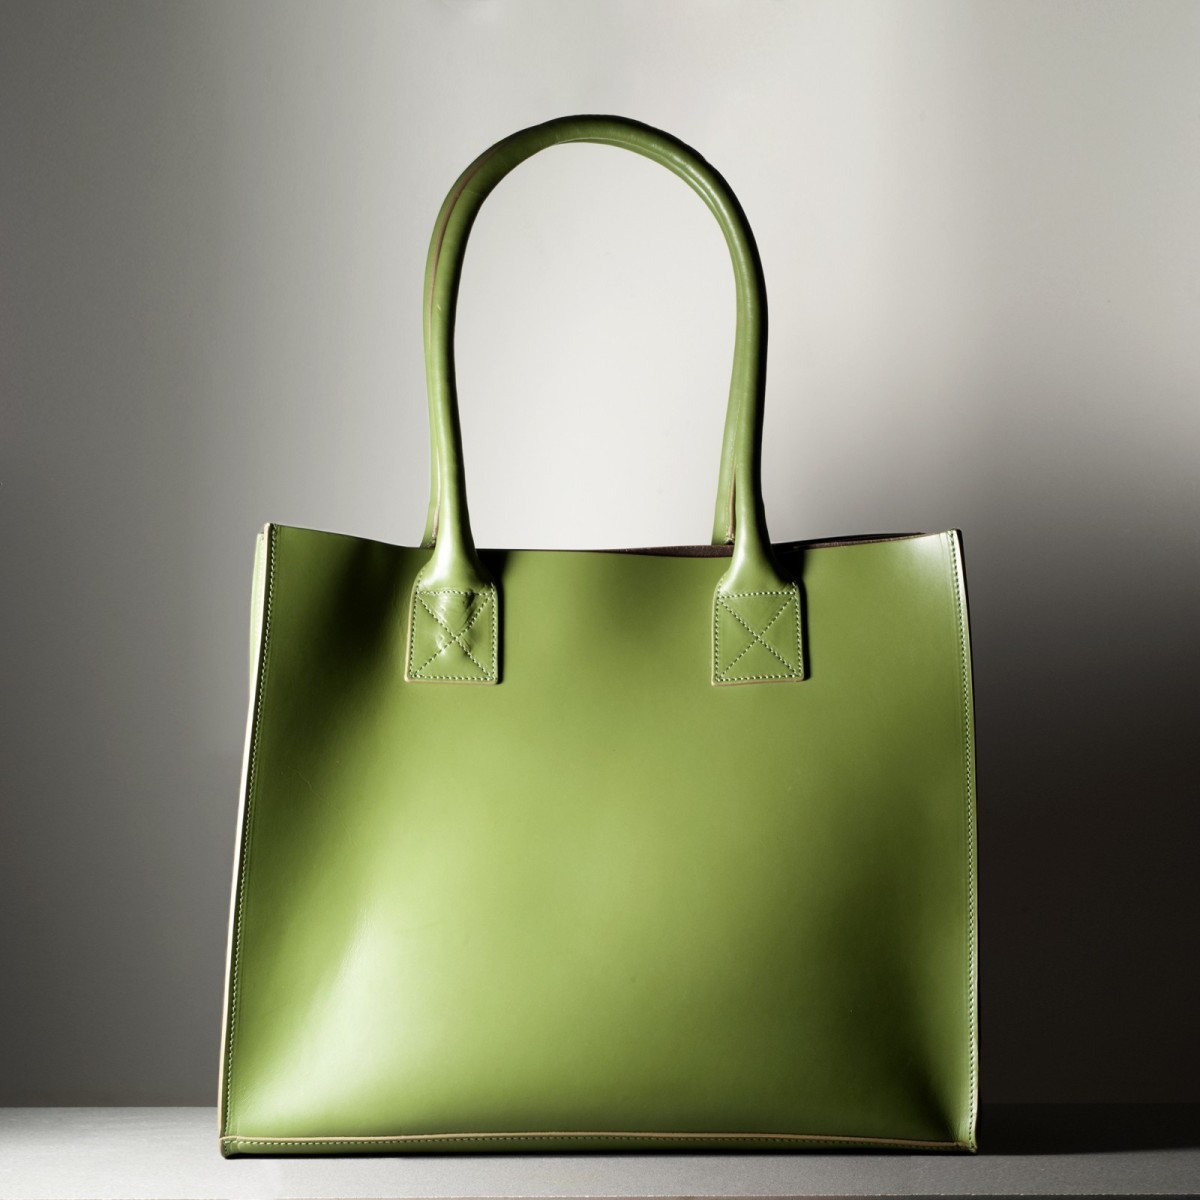 SOFIA - Two-tone leather tote bag, handmade in Italy